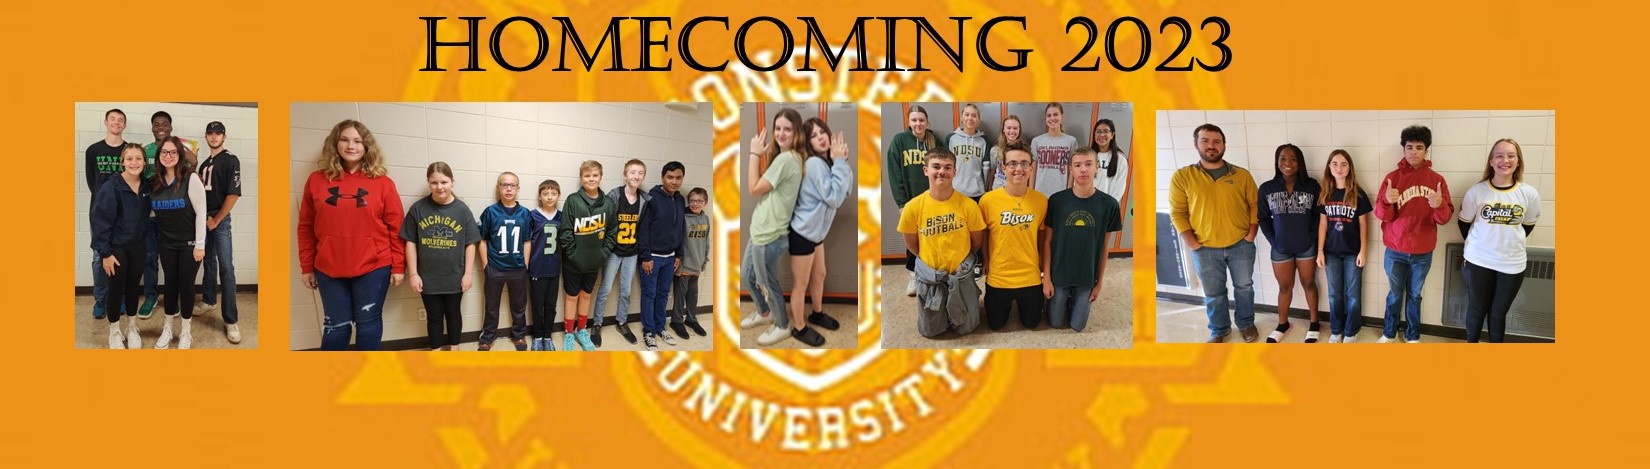 images of groups of students in college wear on a orange background